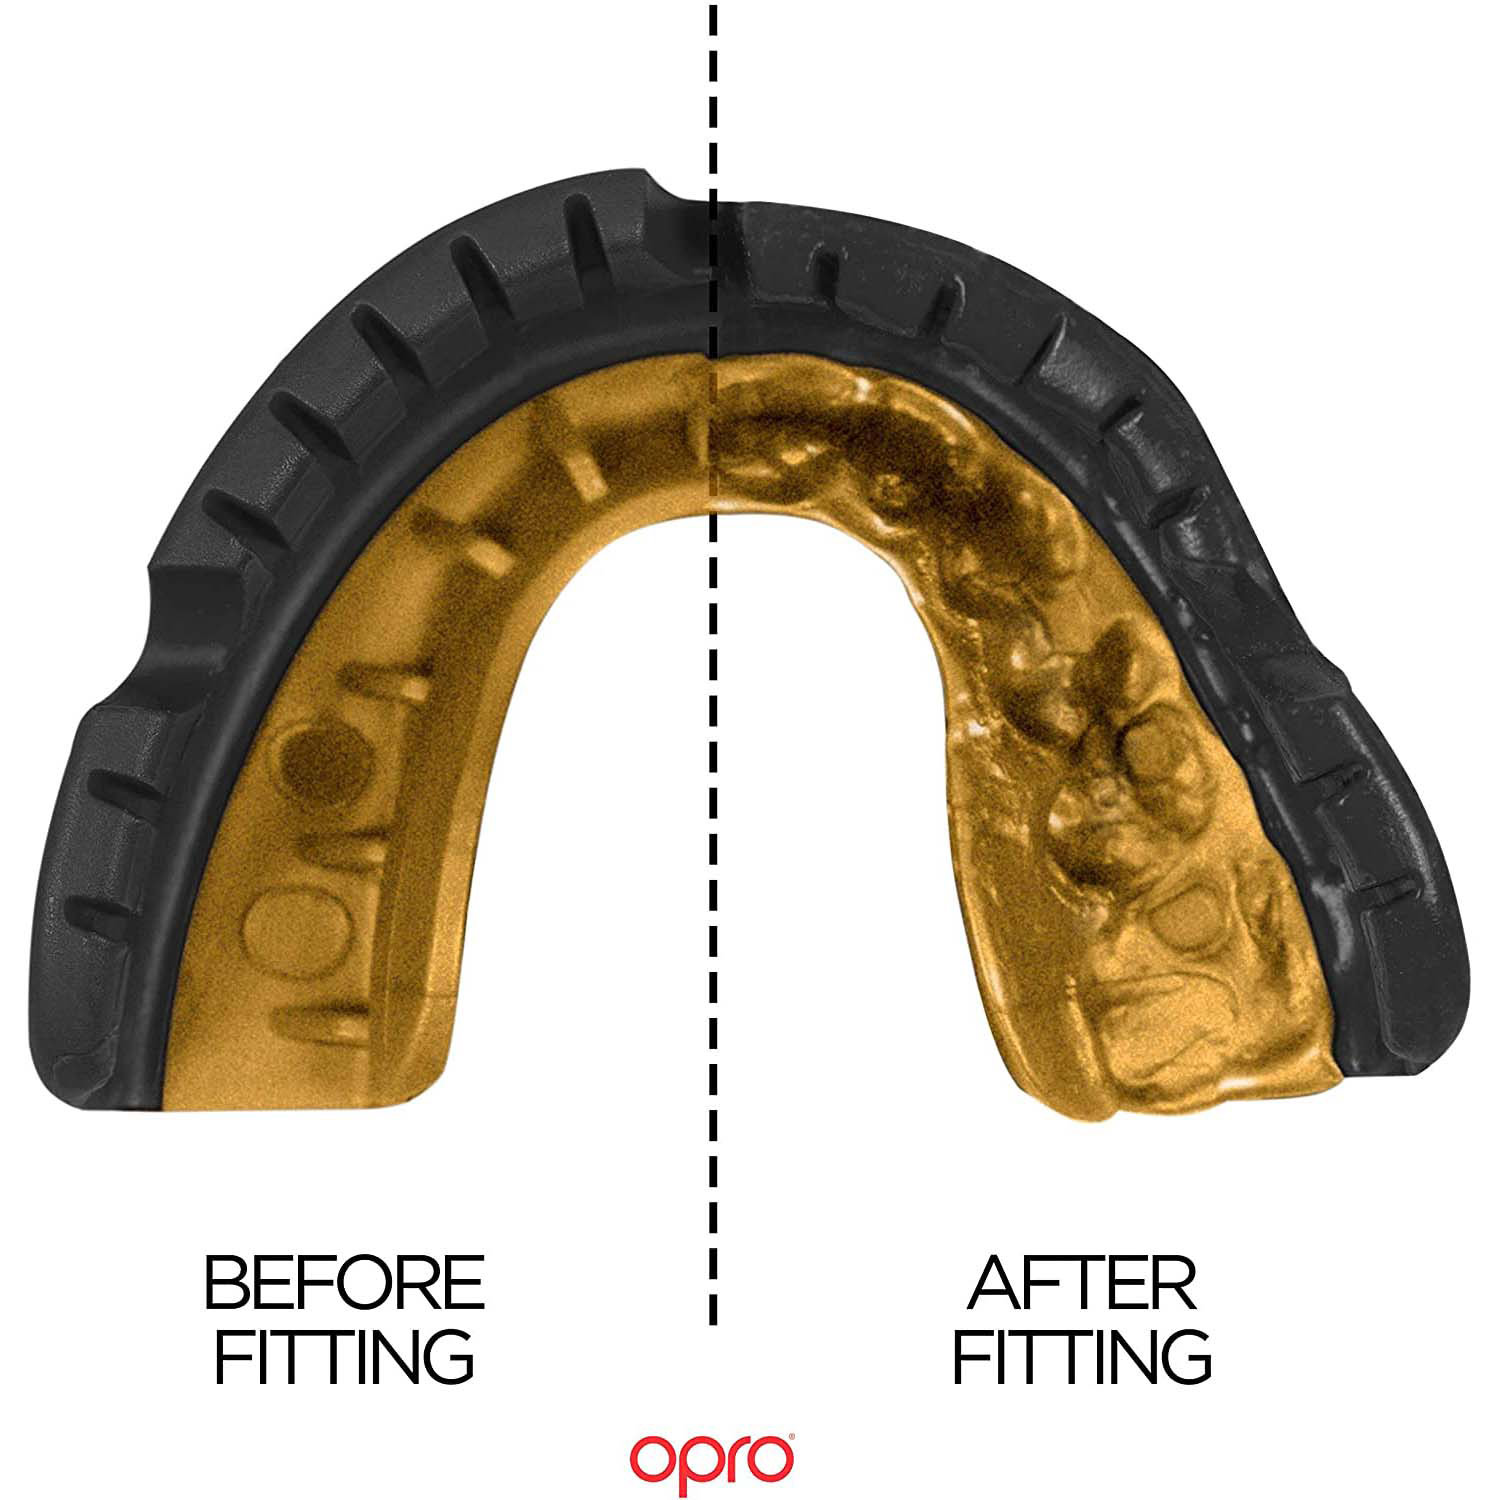 OPRO SELF-FIT MOUTHGUARD FOR BRACES - GOLD LEVEL